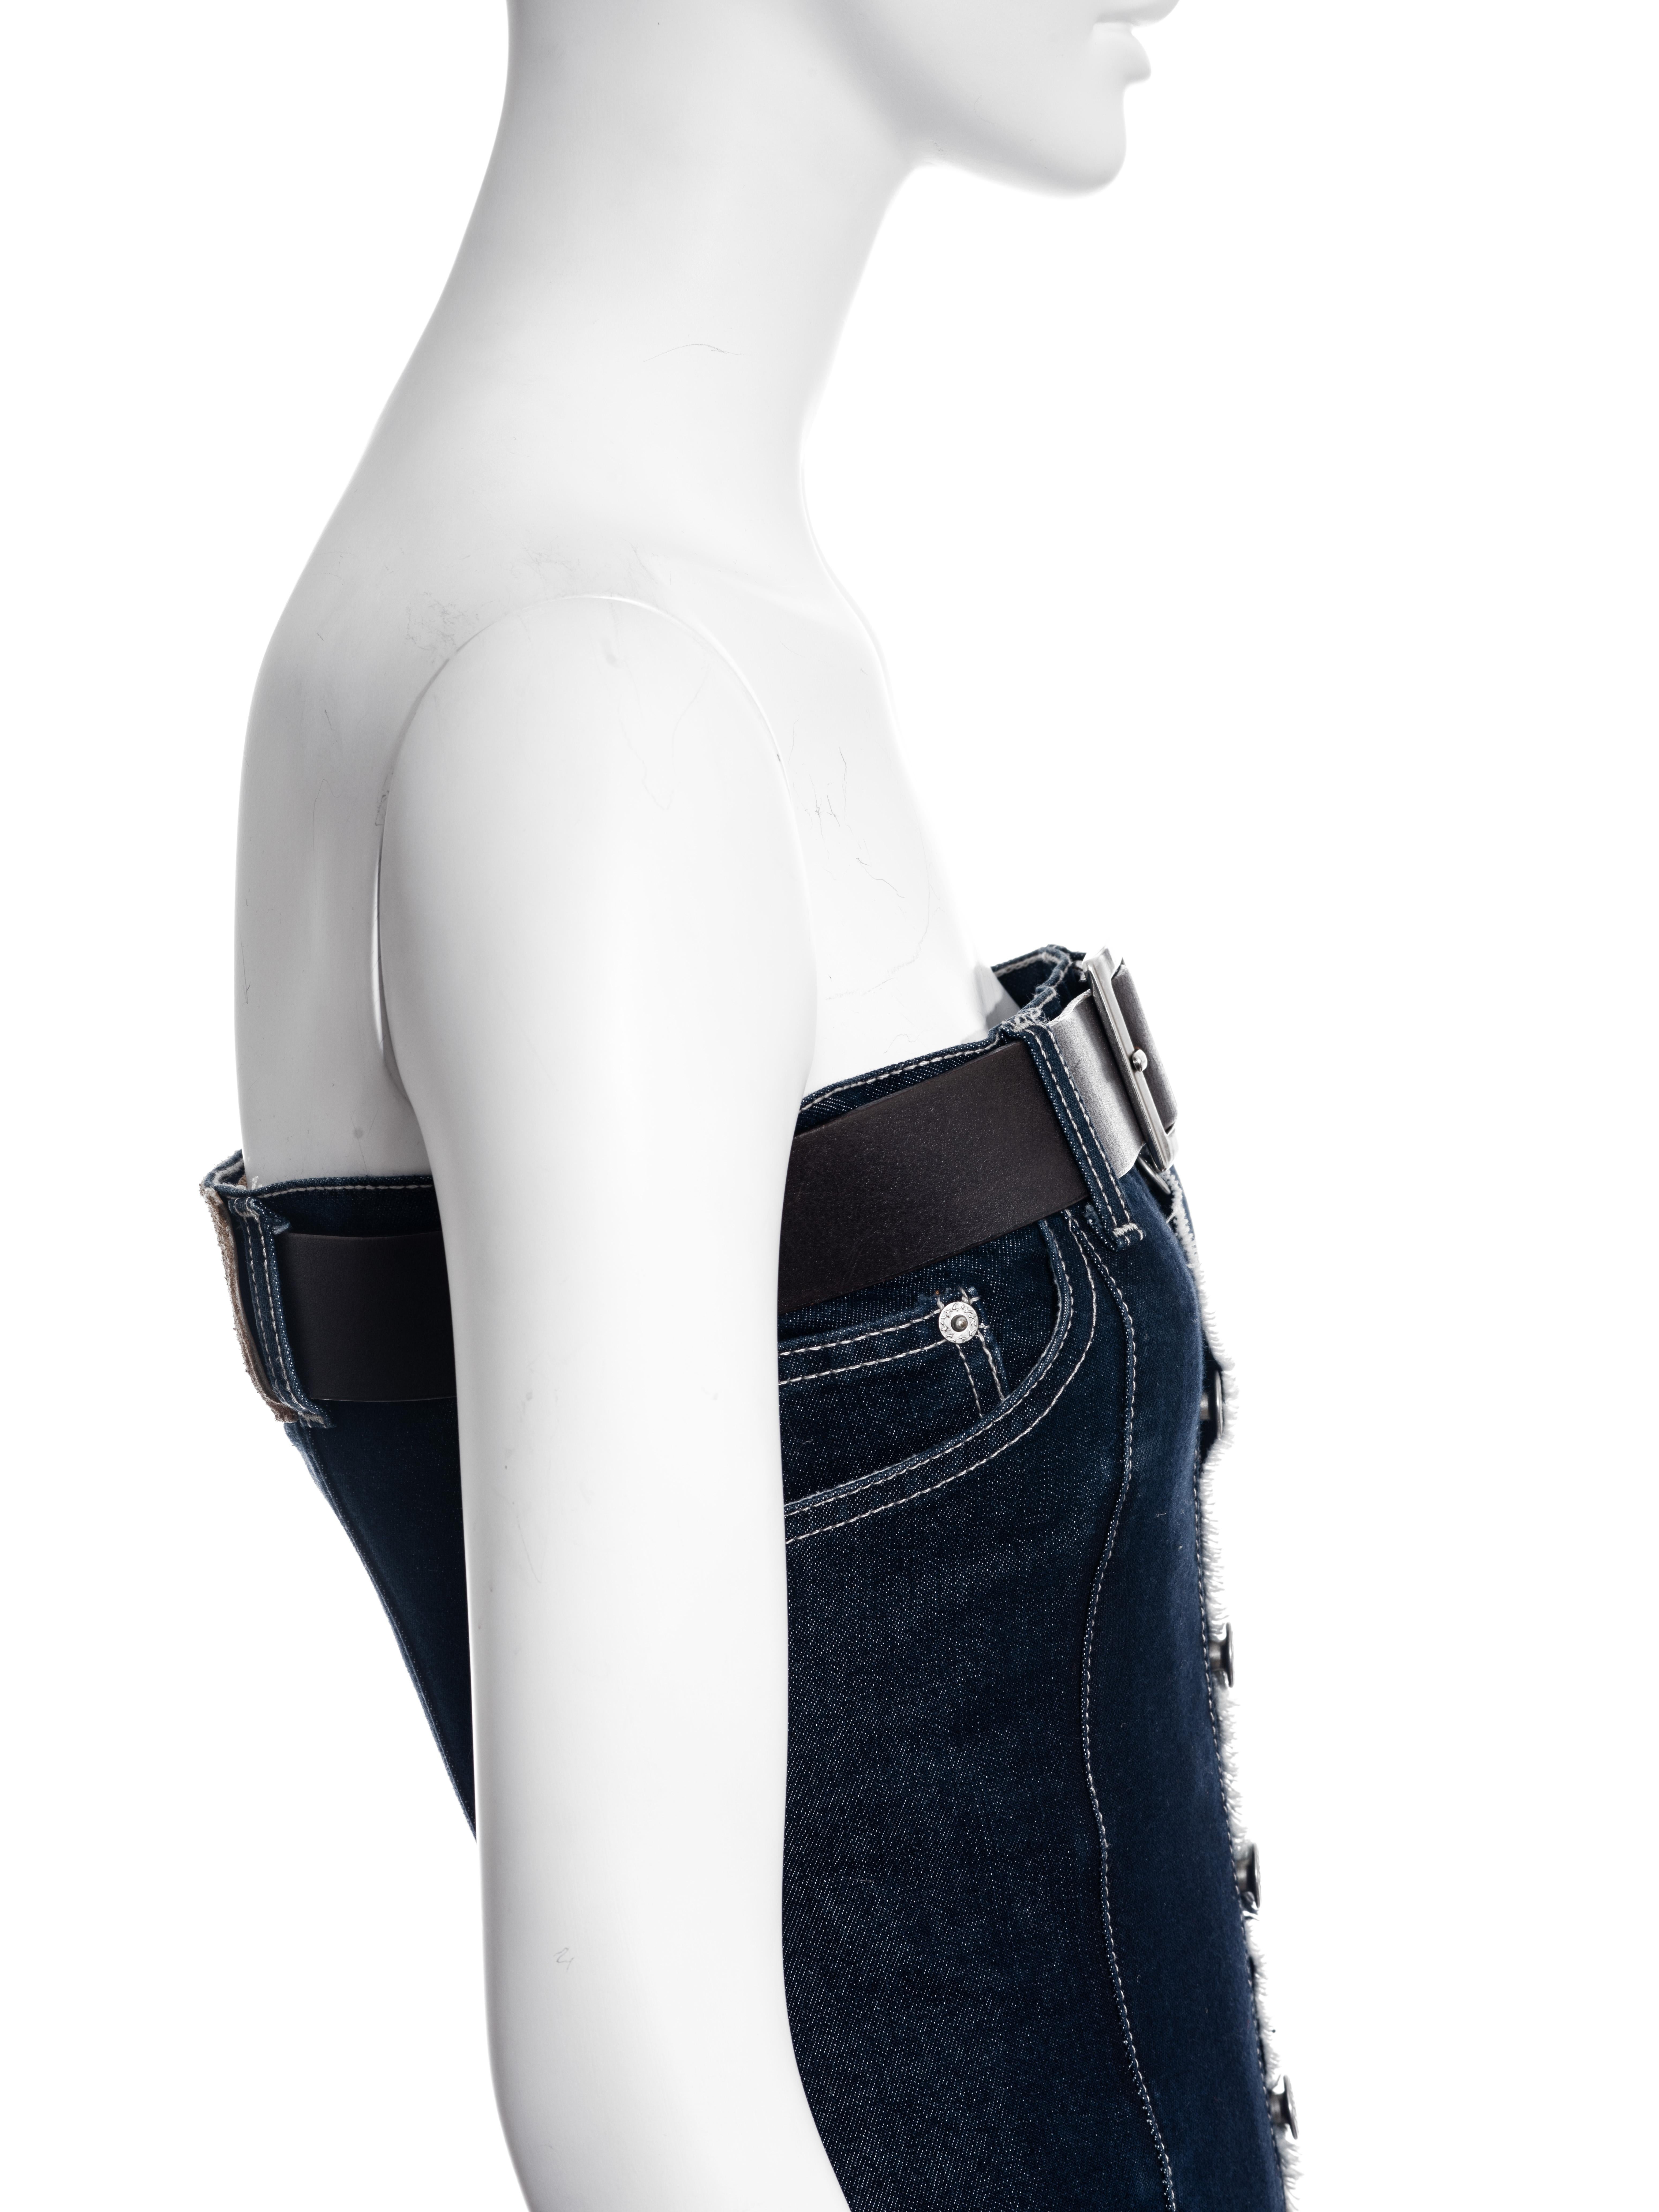 Alexander McQueen indigo denim corseted jumpsuit and leather belt, fw 1996 In Good Condition For Sale In London, GB